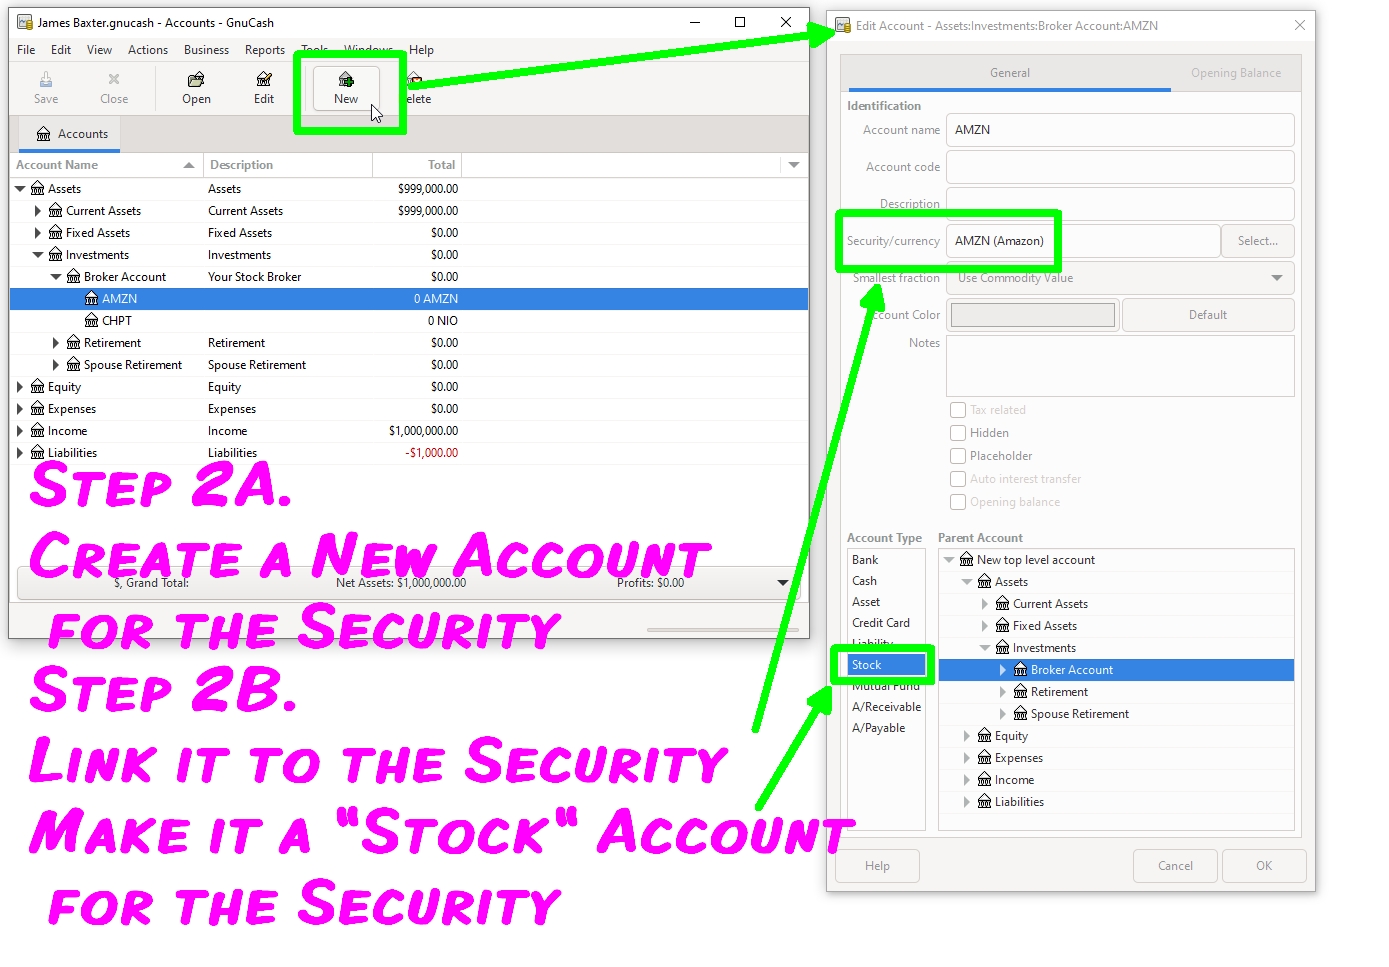 Linking new Account to a security